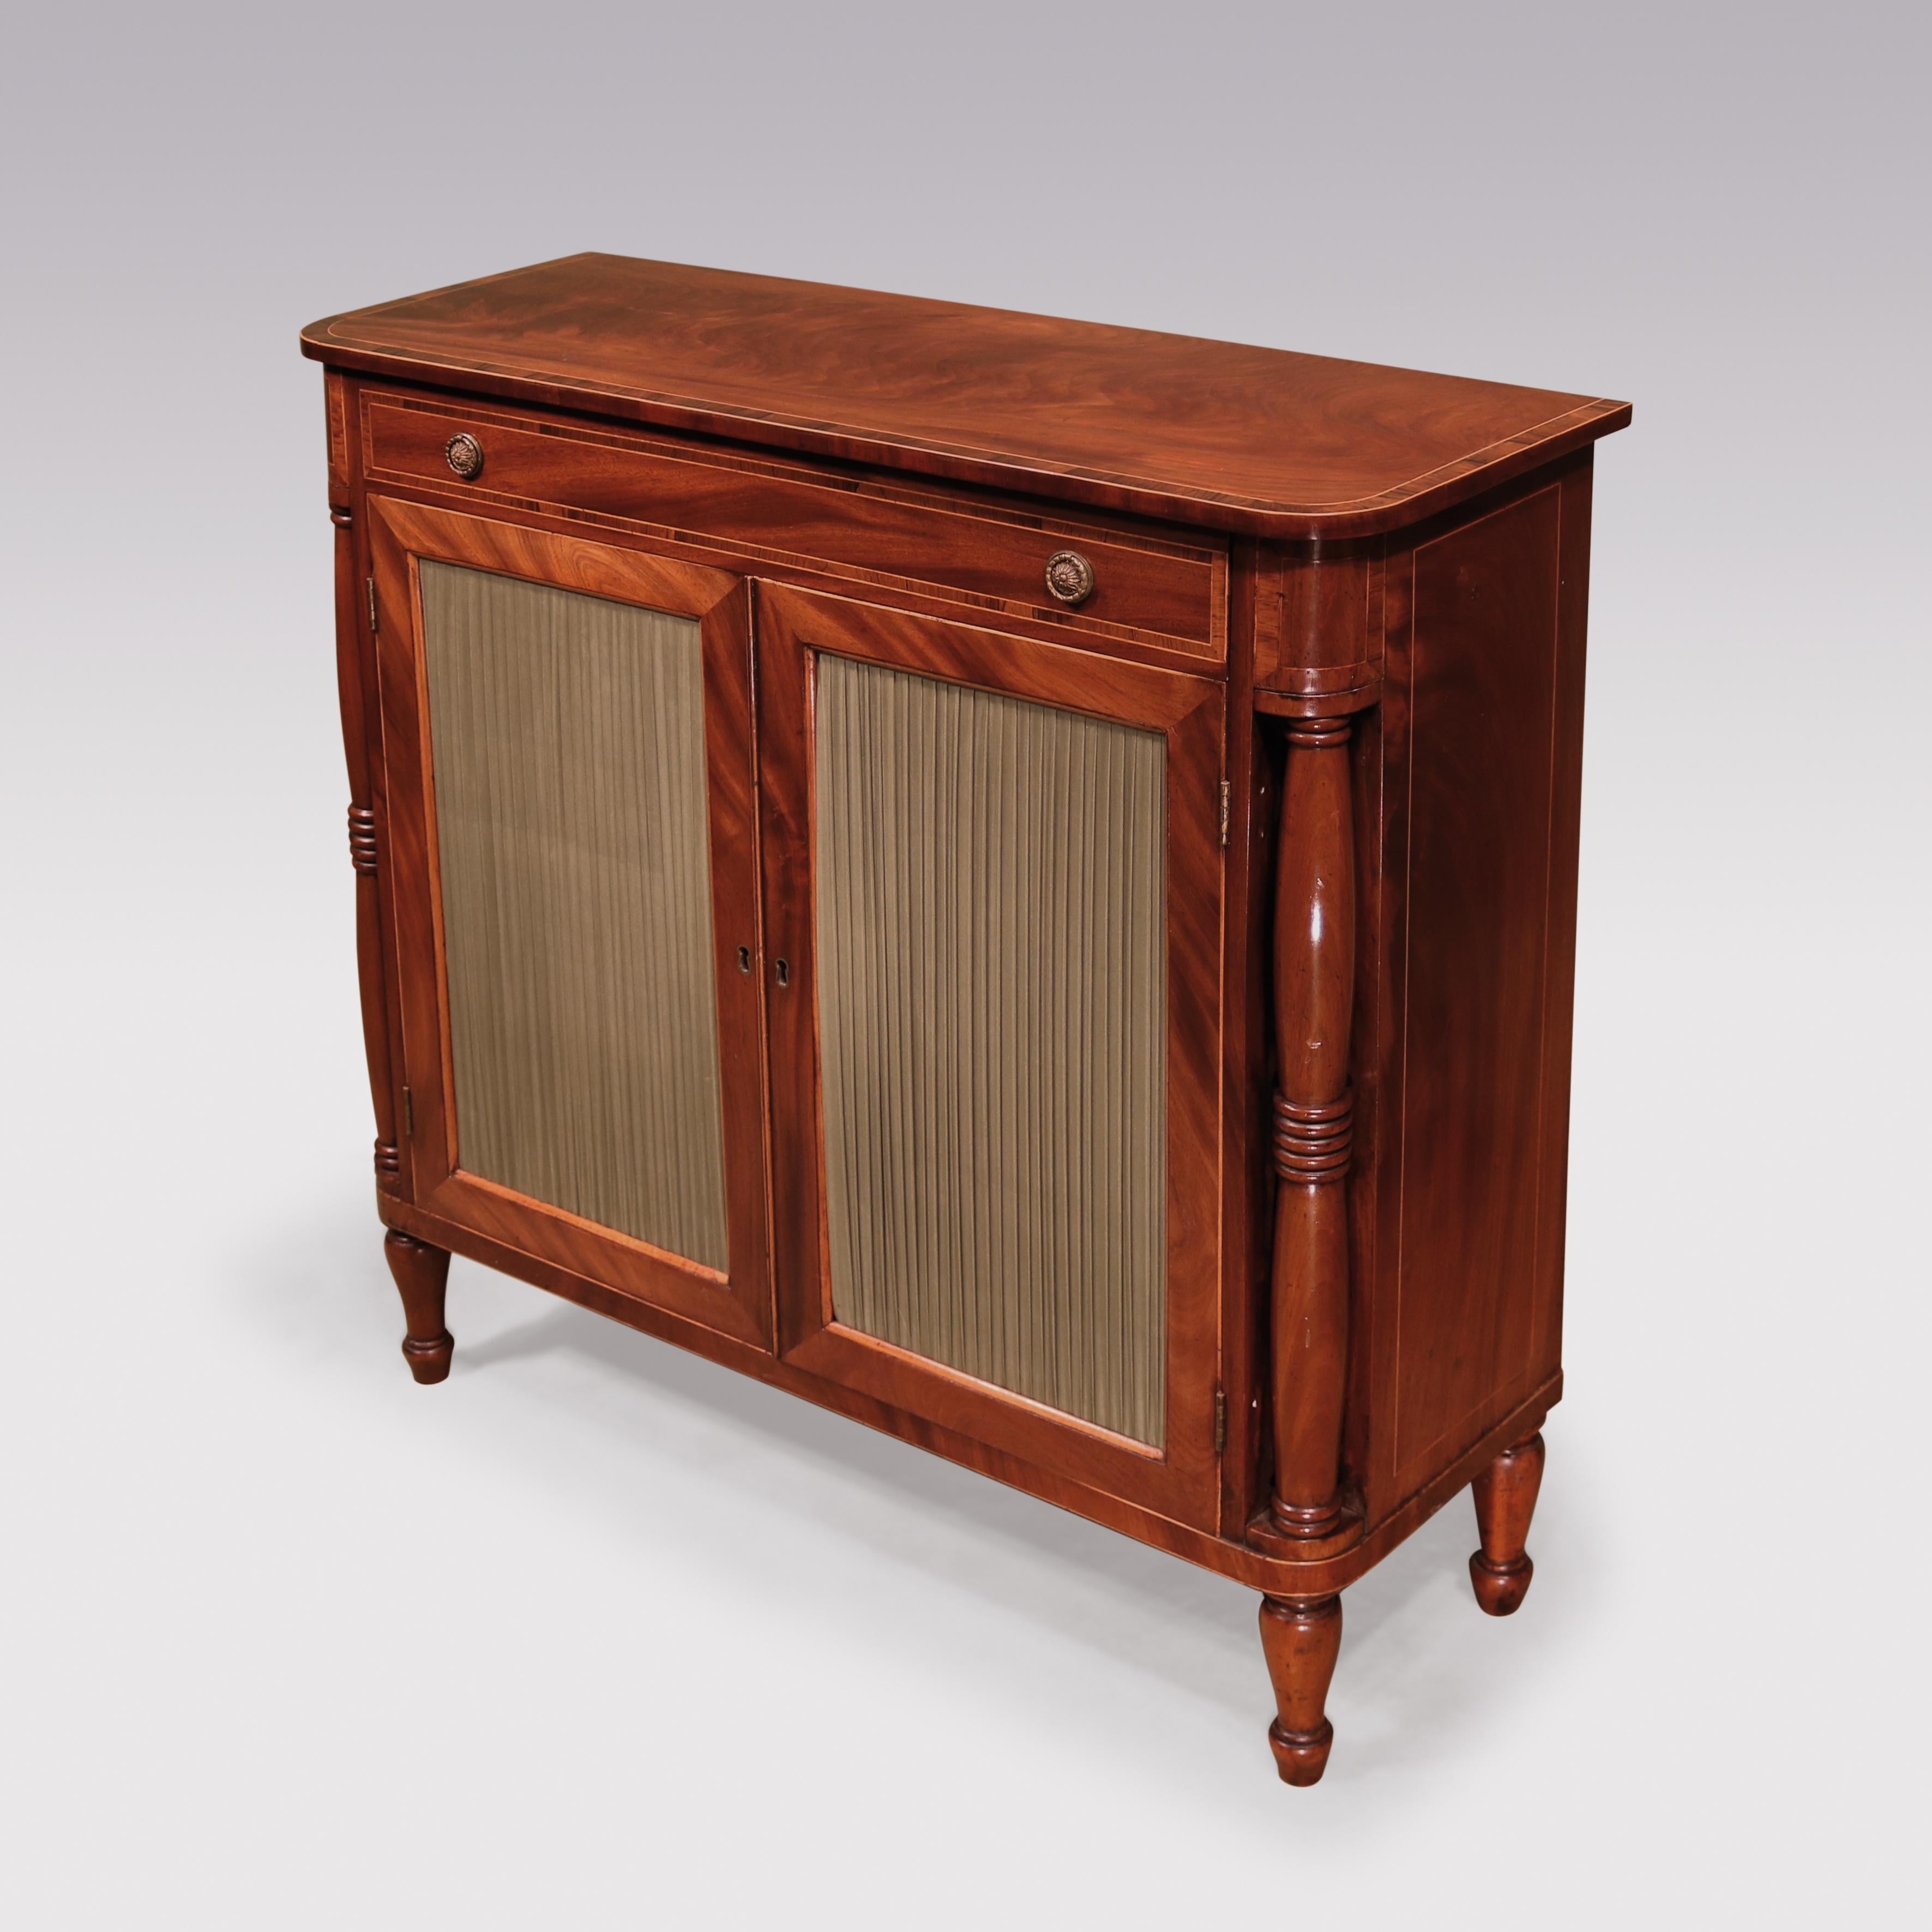 An early 19th Century Regency period figured Mahogany two door Cabinet, boxwood strung throughout having crossbanded ‘D’ shaped top above frieze drawer and pleated doors flanked by ring turned double baluster columns, supported on short turned feet.